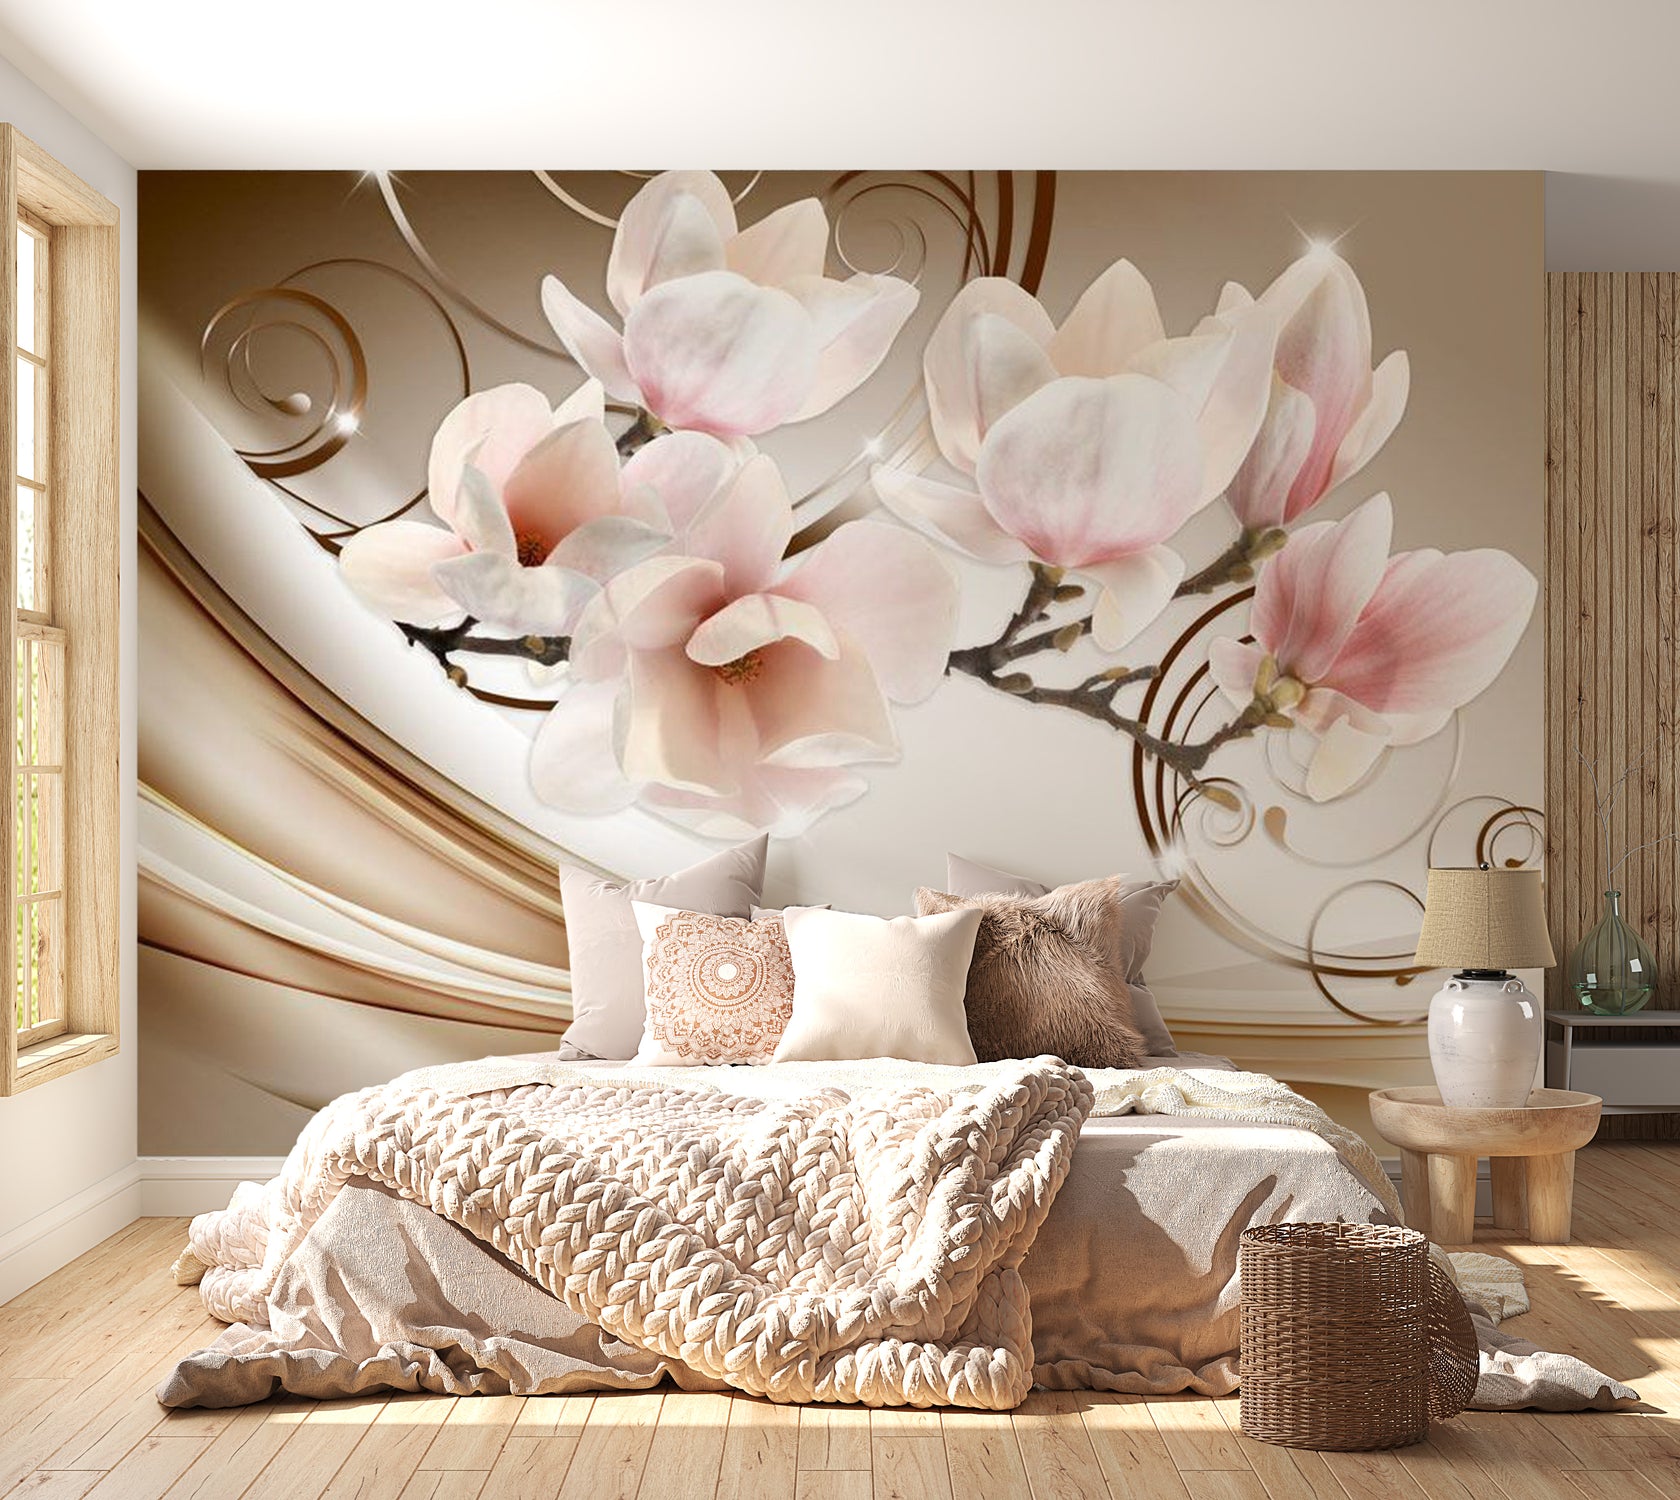 Peel & Stick Floral Wall Mural - Waves Of Magnolia - Removable Wall Decals